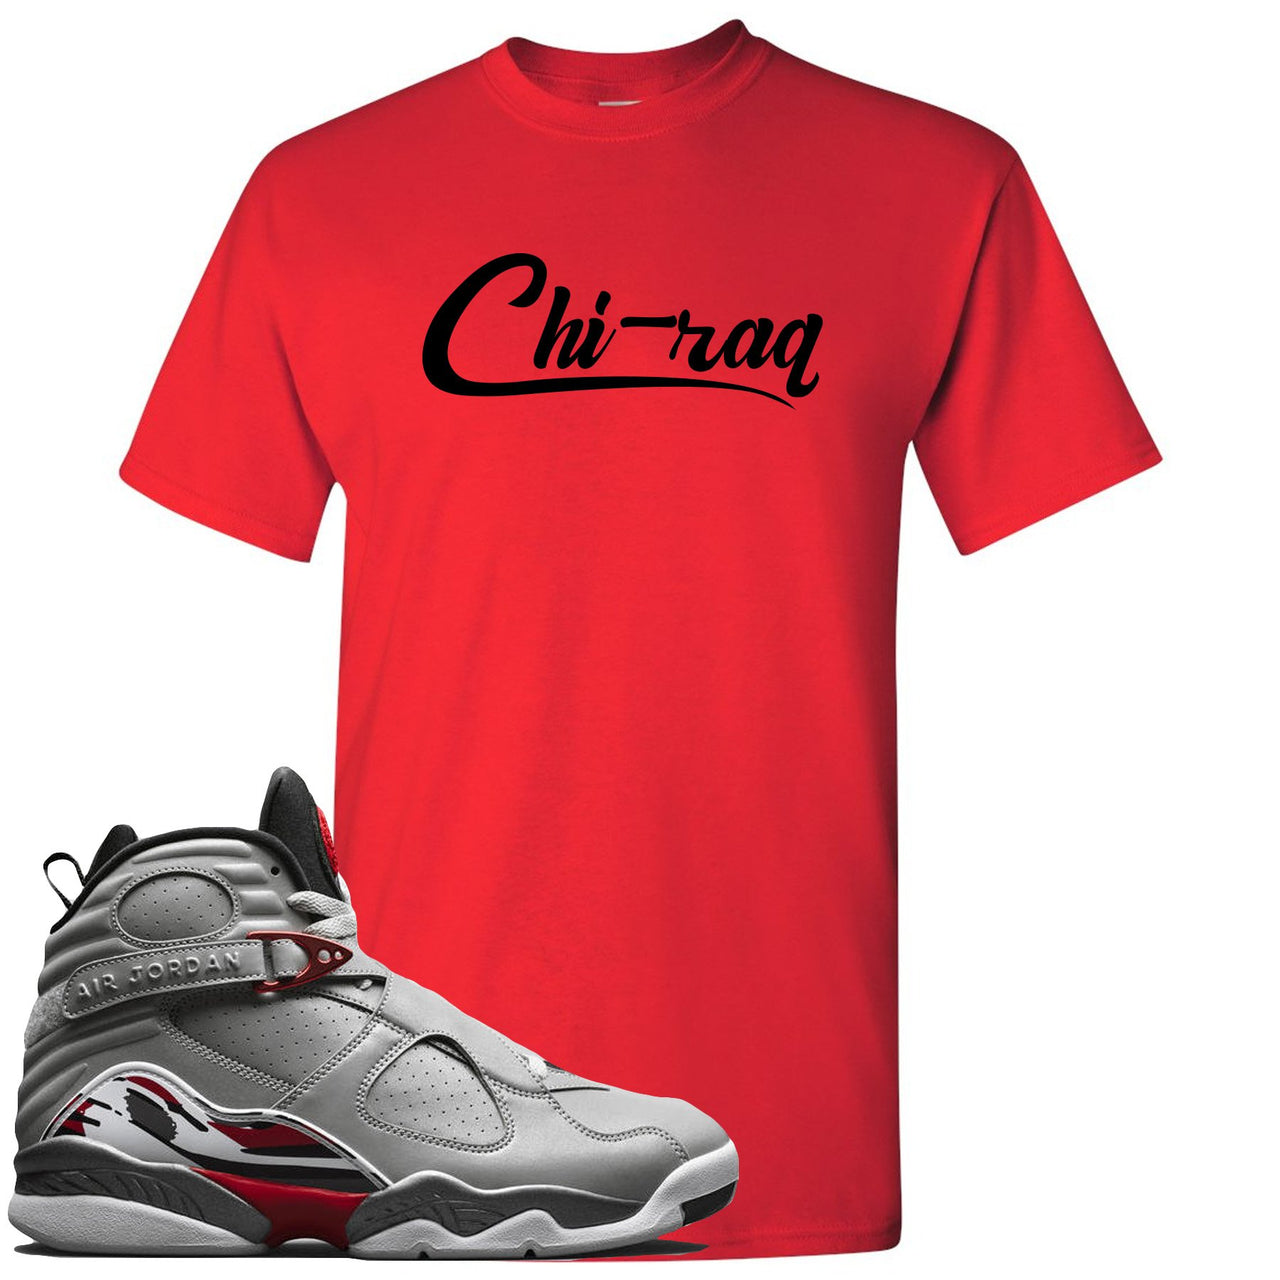 Reflections of a Champion 8s T Shirt | Chiraq Script, Red